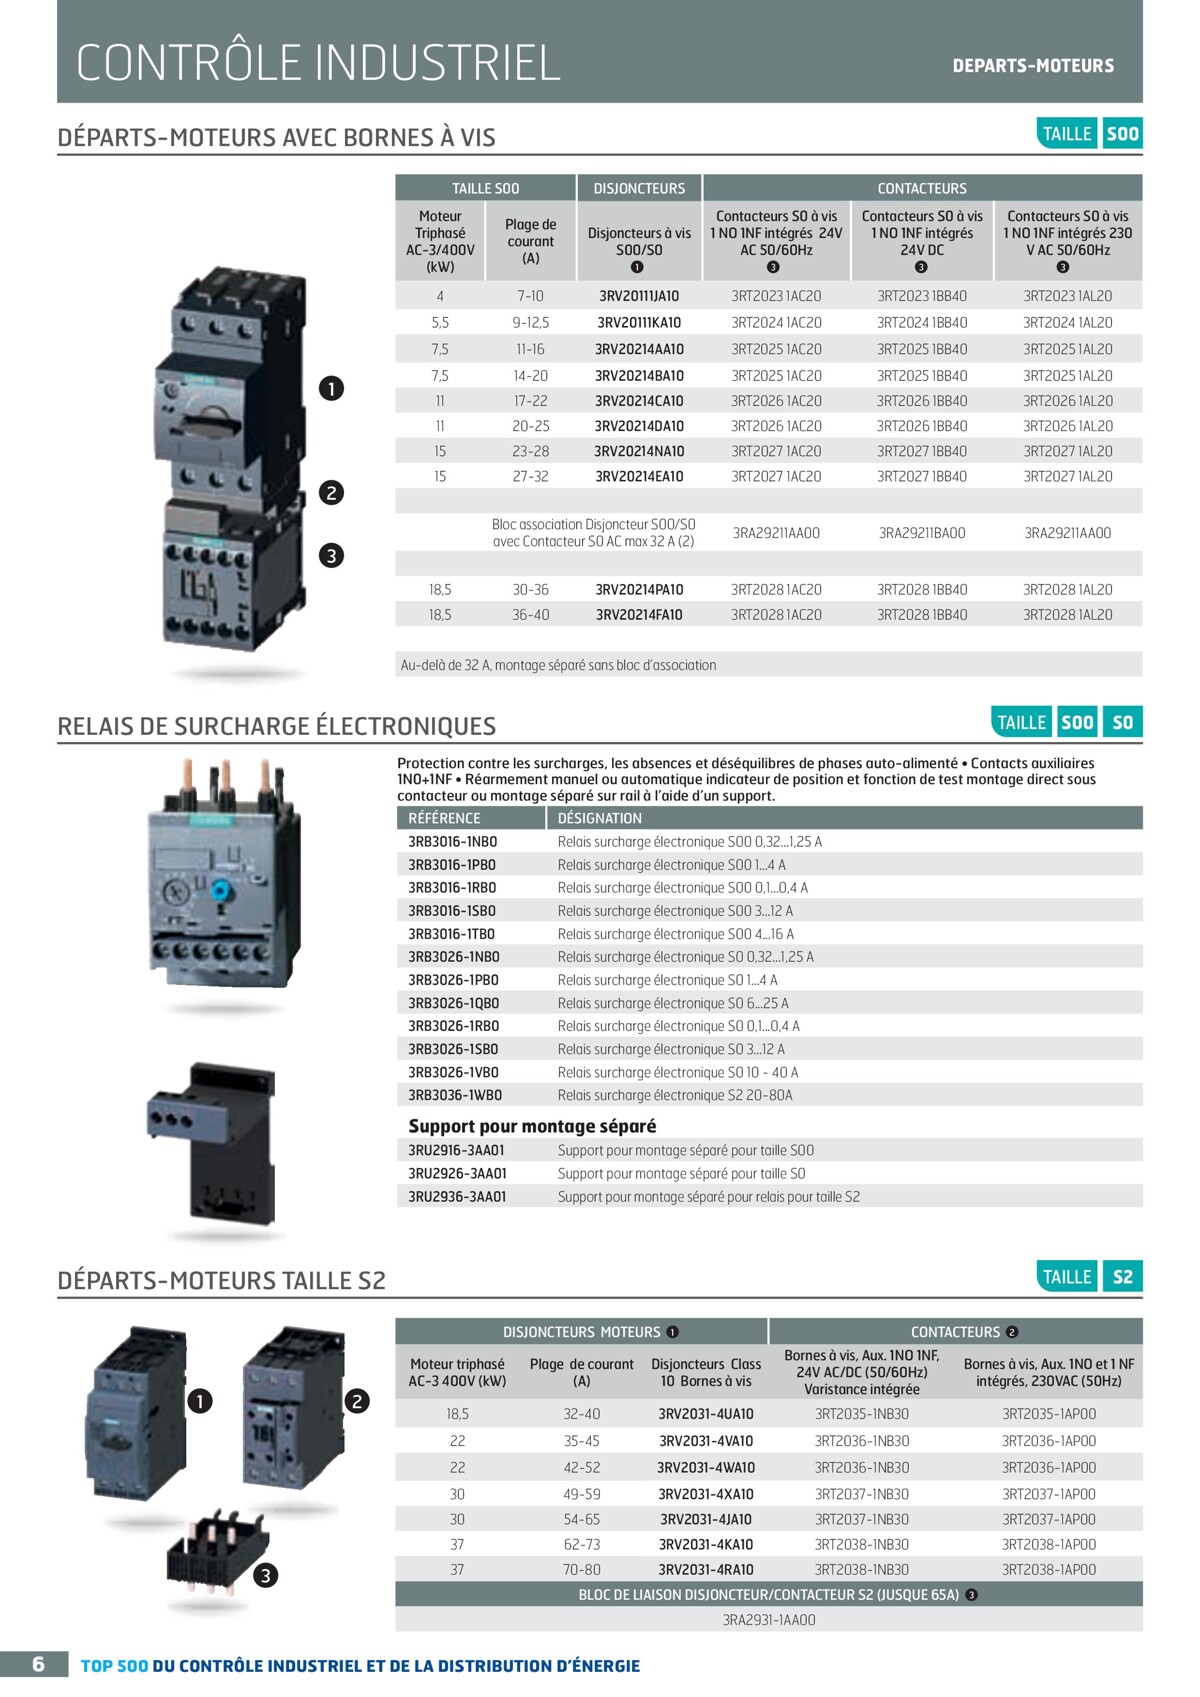 Catalogue TOP 500 siemens - Rexel, page 00006